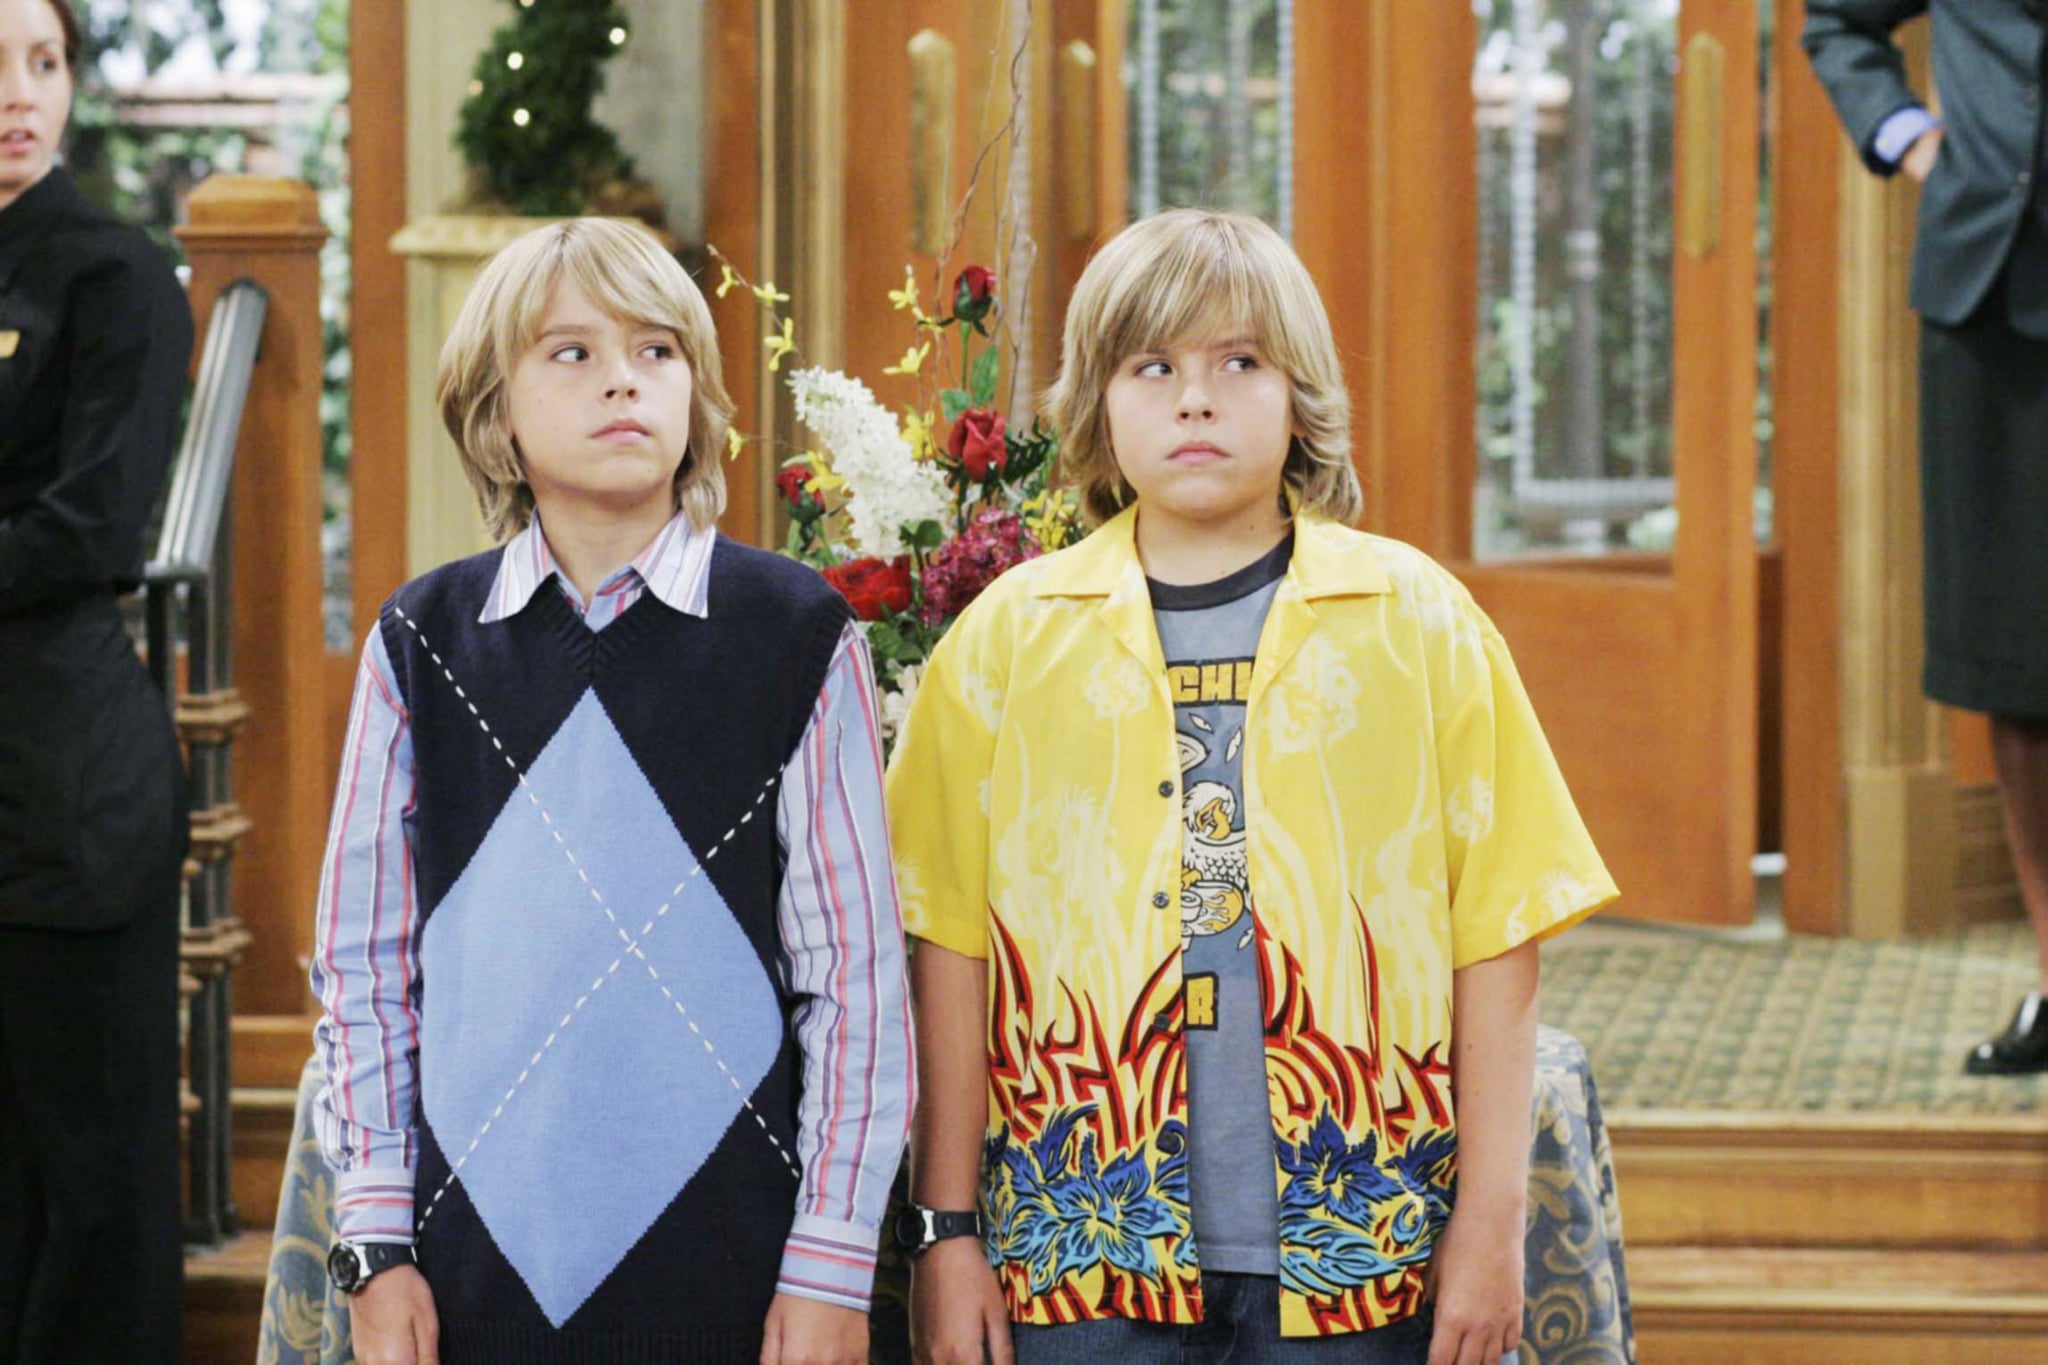 THE SUITE LIFE OF ZACK AND CODY, Cole Sprouse, Dylan Sprouse, (Season 1), 2005-08,  Disney Channel / Courtesy: Everett Collection